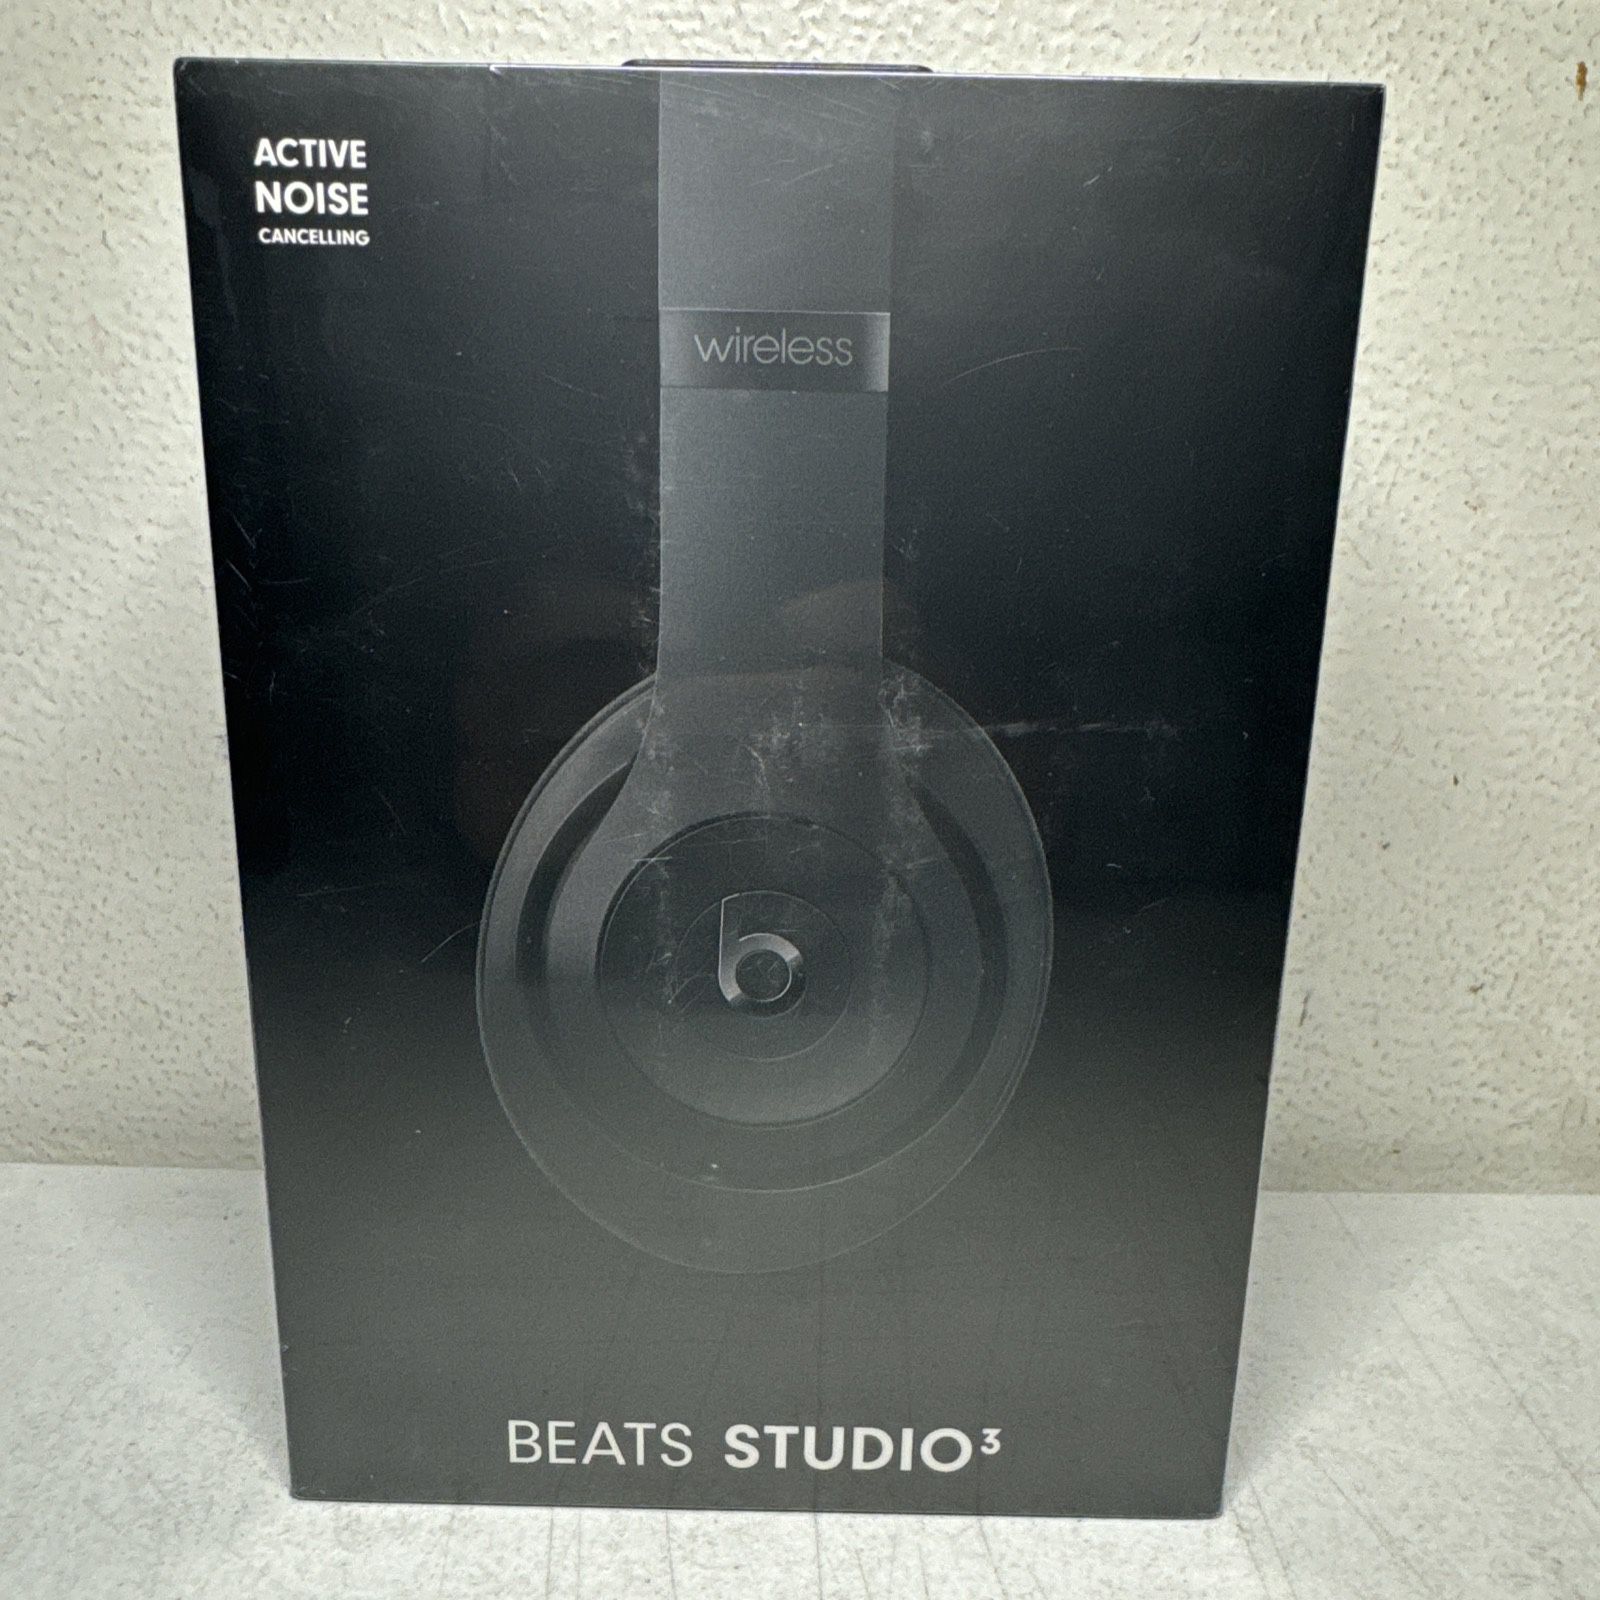 Beats by Dr. Dre Studio 3 Over the Ear Wireless Headphones - Black New Sealed